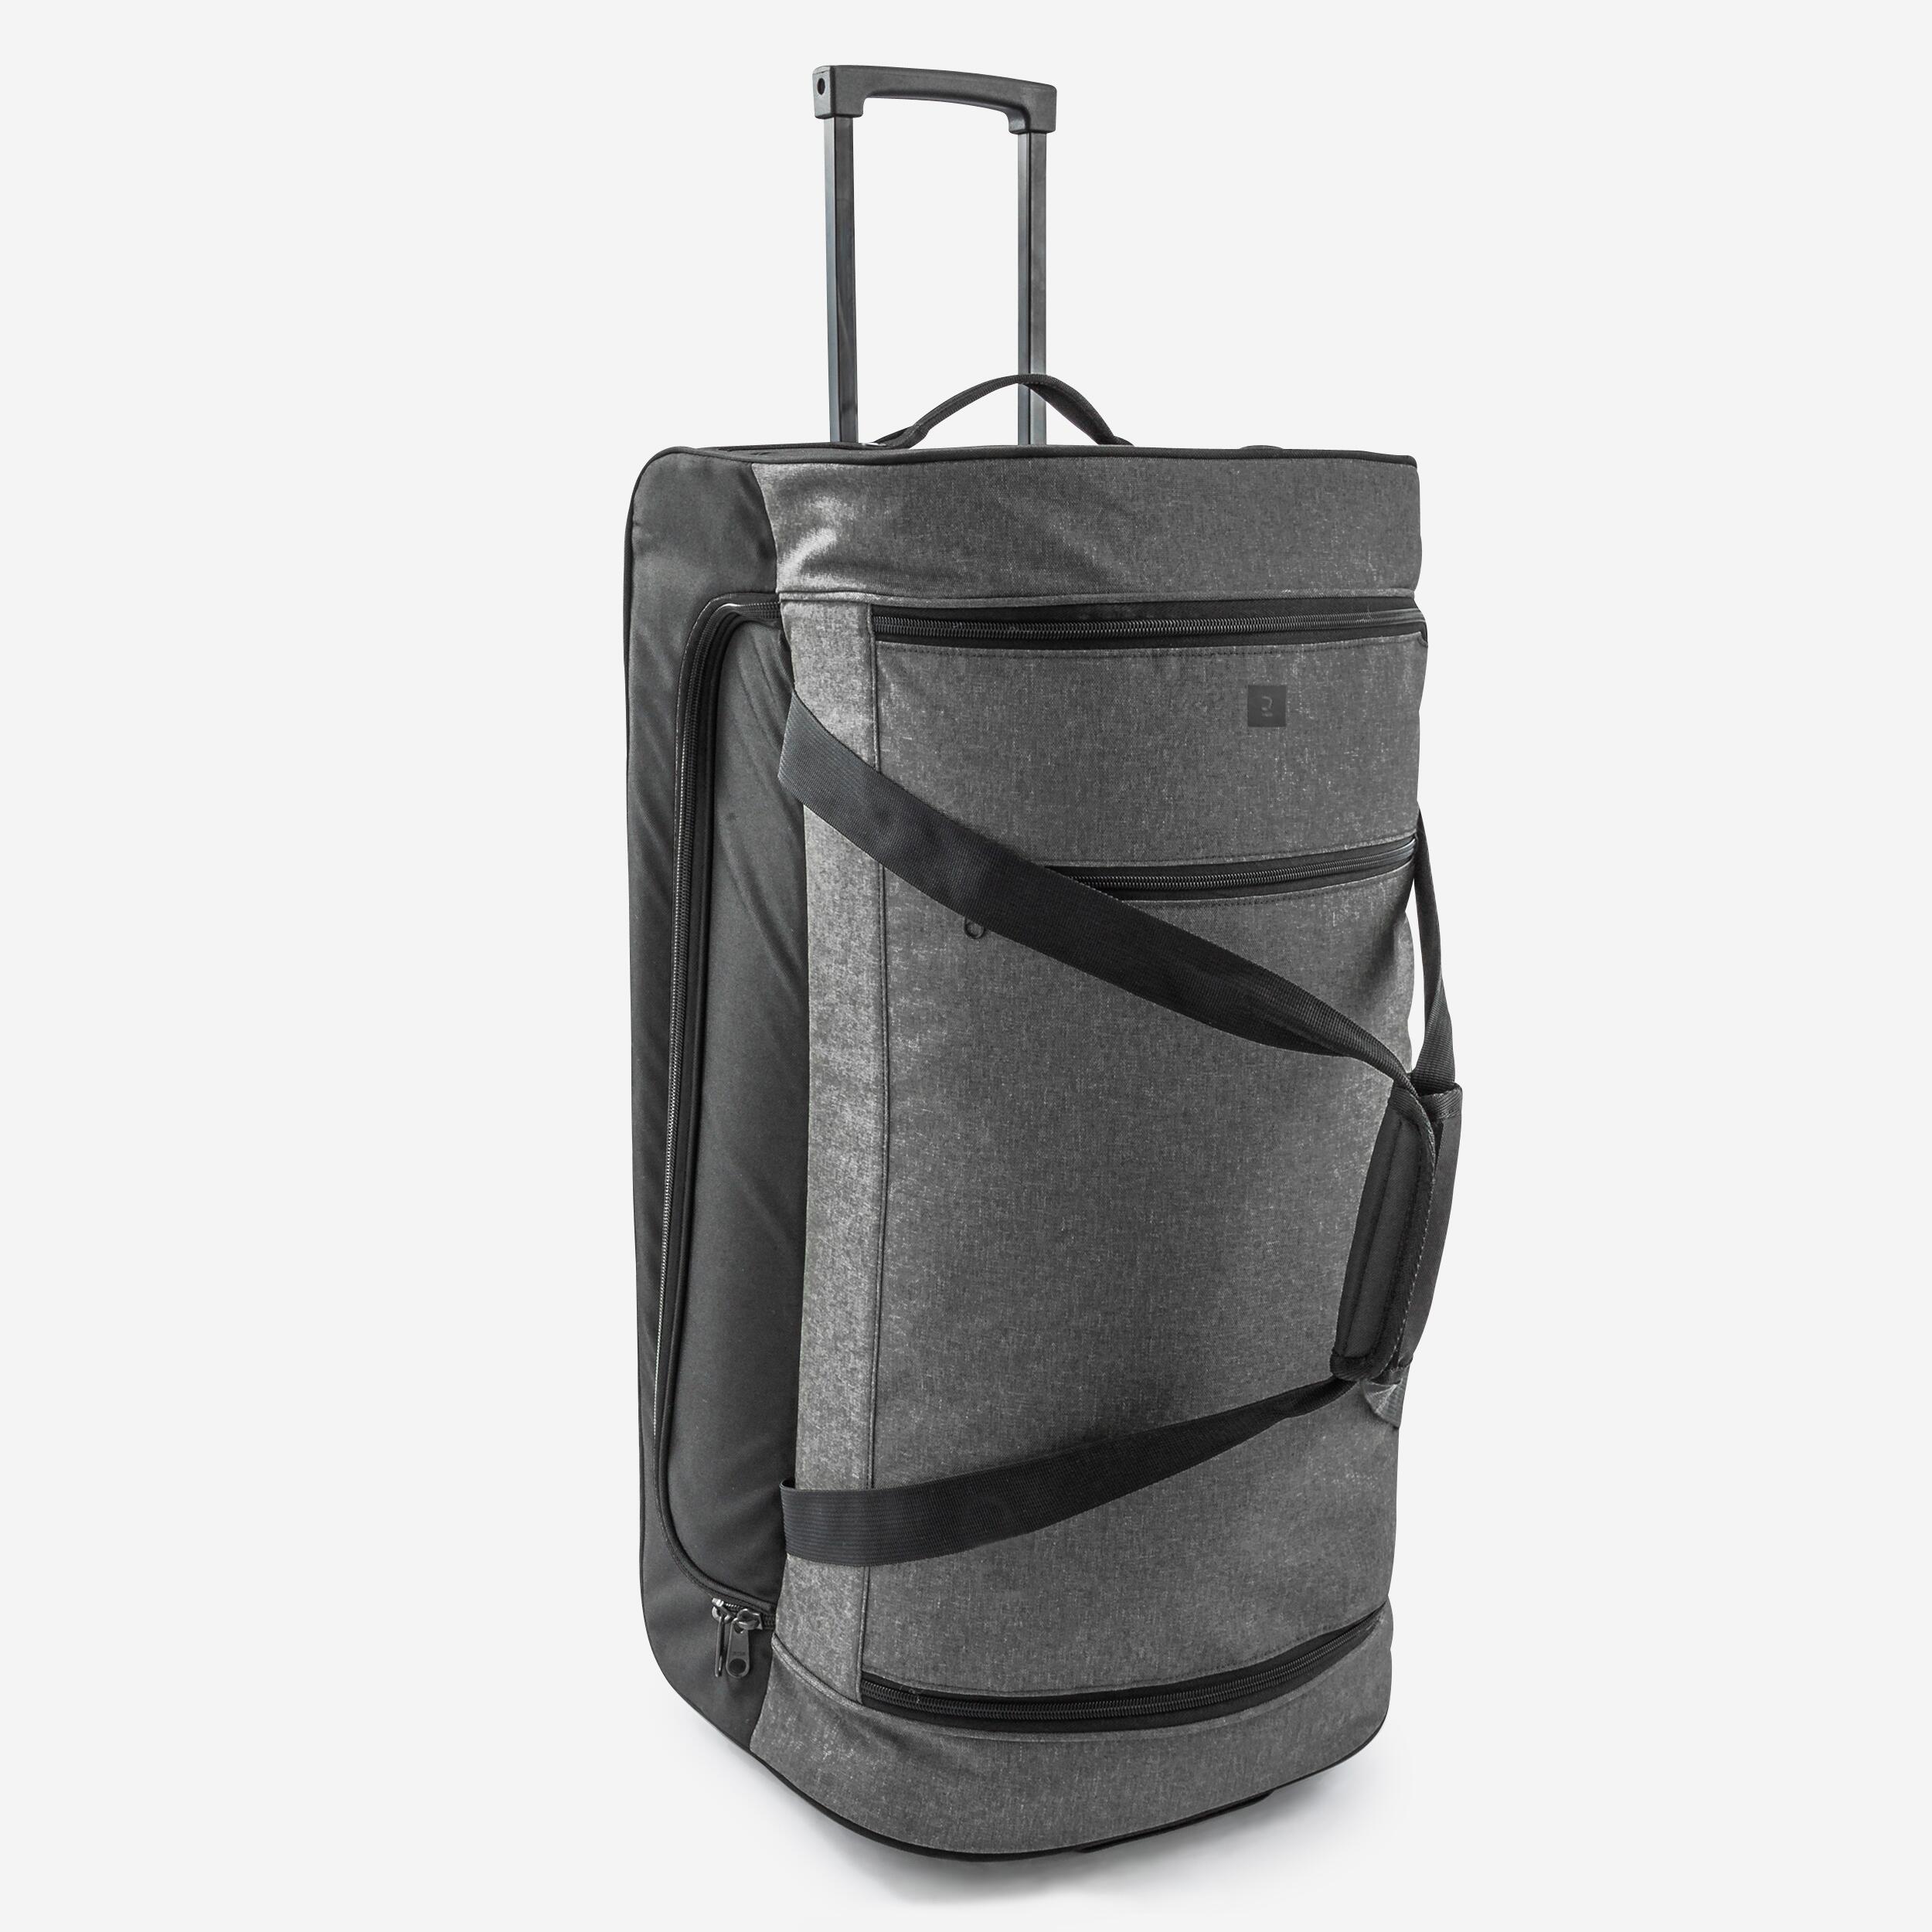 Does anyone own this duffel bag that's in the upcoming Aldi finds?  Wondering about quality and durability. : r/aldi